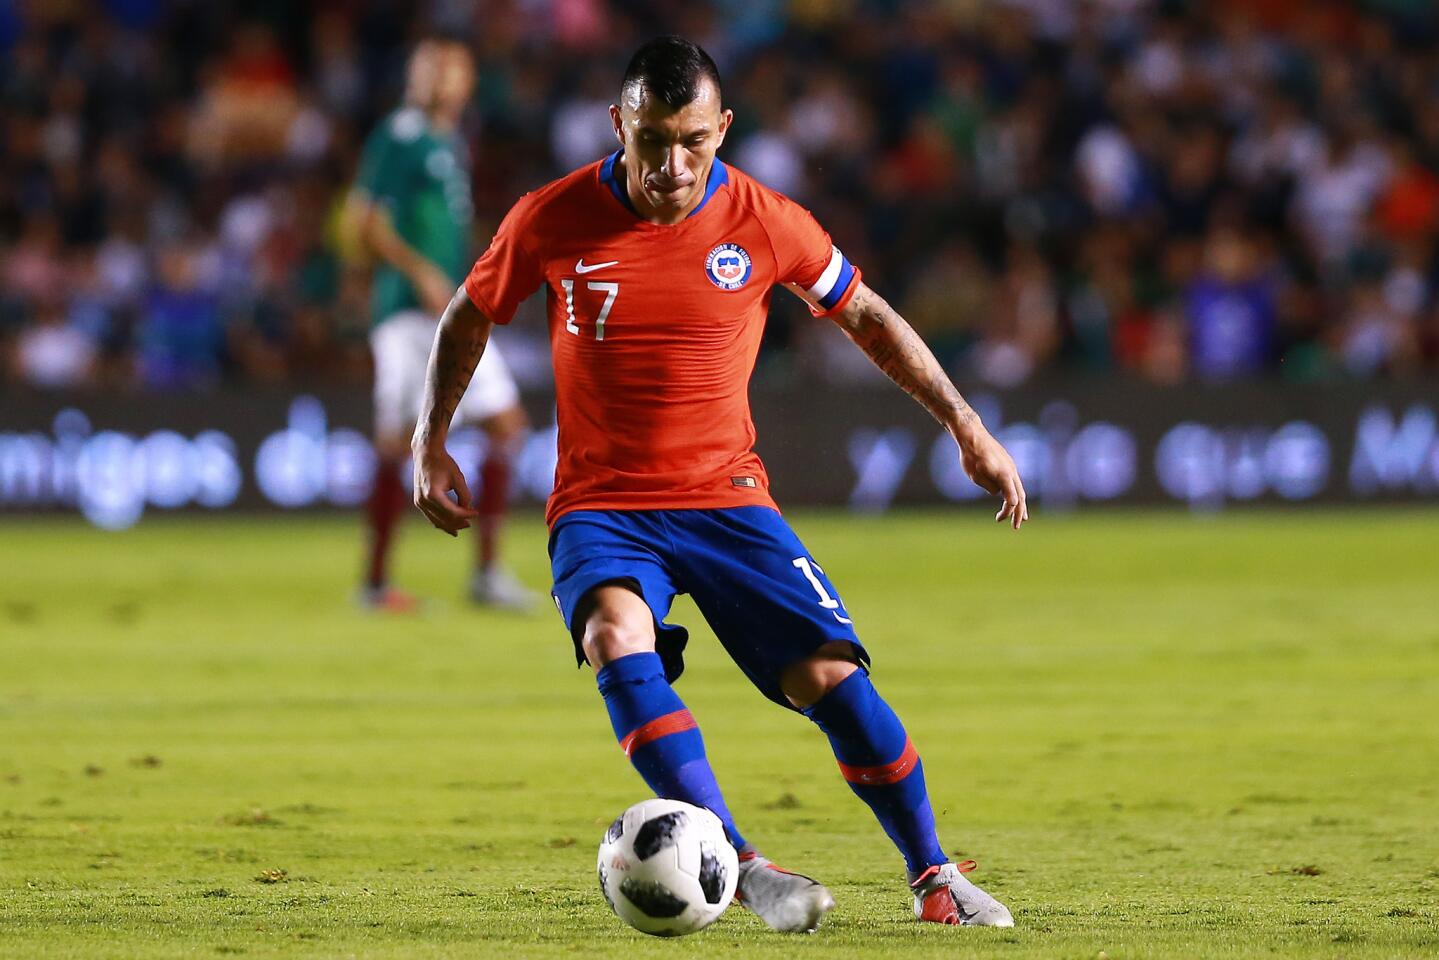 QUERETARO, MEXICO - OCTOBER 16: Gary Medel of Chile controls the ball during the international friendly match between Mexico and Chile at La Corregidora Stadium on October 16, 2018 in Queretaro, Mexico. (Photo by Manuel Velasquez/Getty Images) ** OUTS - ELSENT, FPG, CM - OUTS * NM, PH, VA if sourced by CT, LA or MoD **